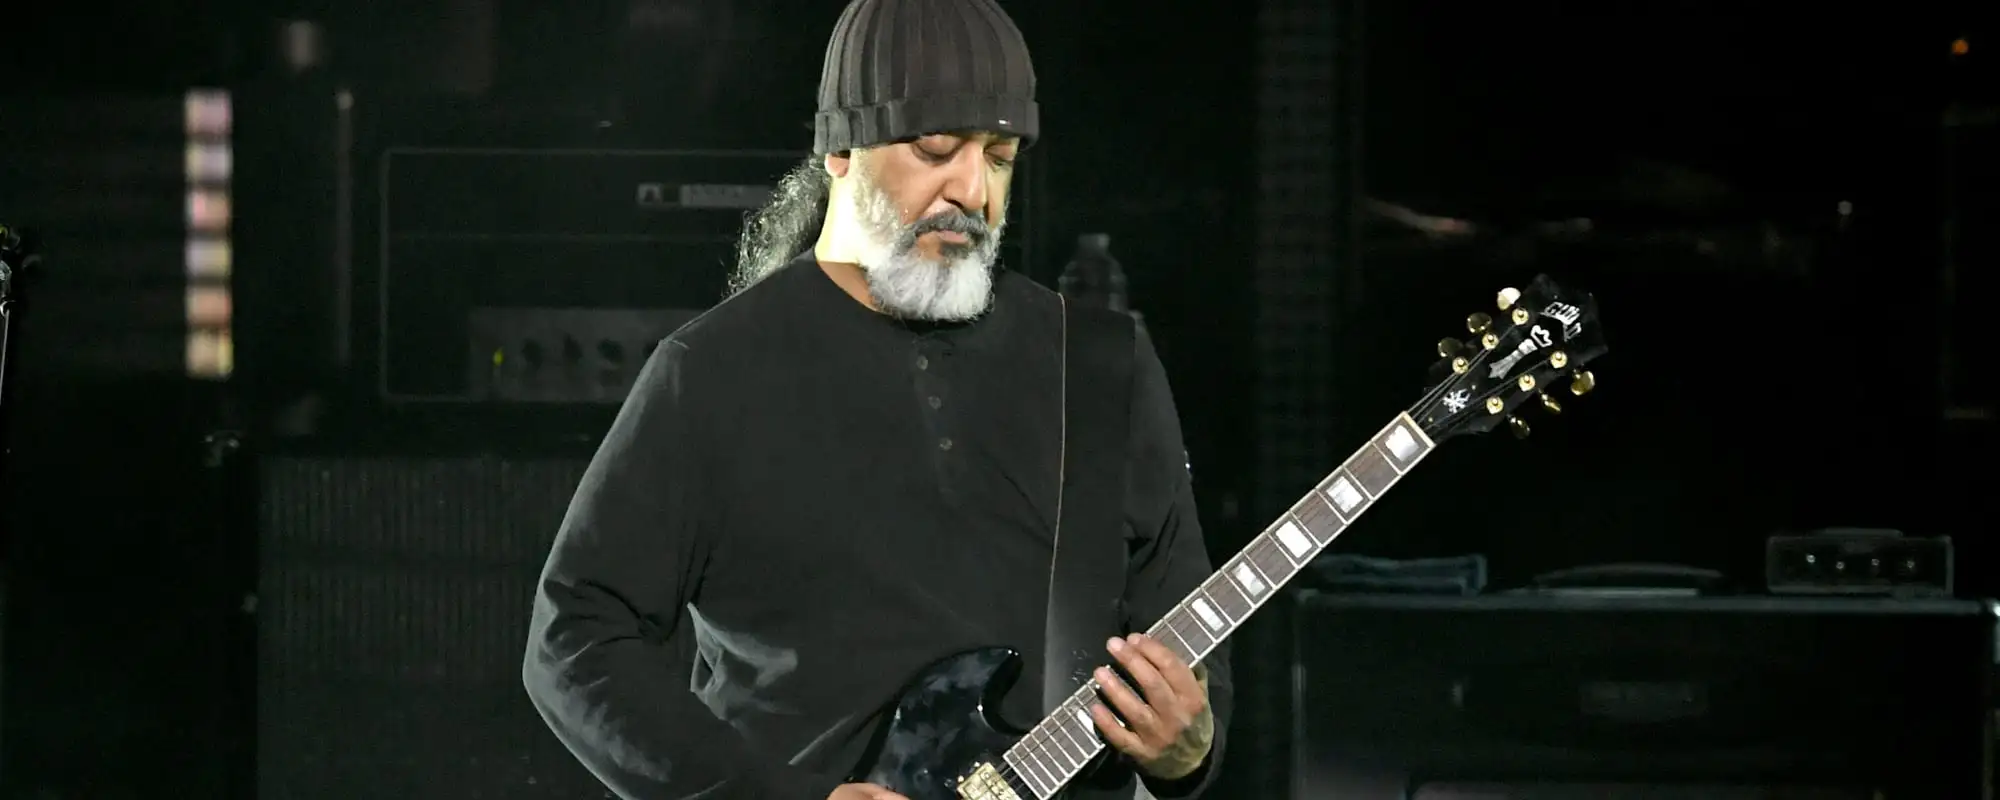 Grunge Superstars Kim Thayil & Jerry Cantrell to Conduct “Sounds of Seattle” Rock Camp